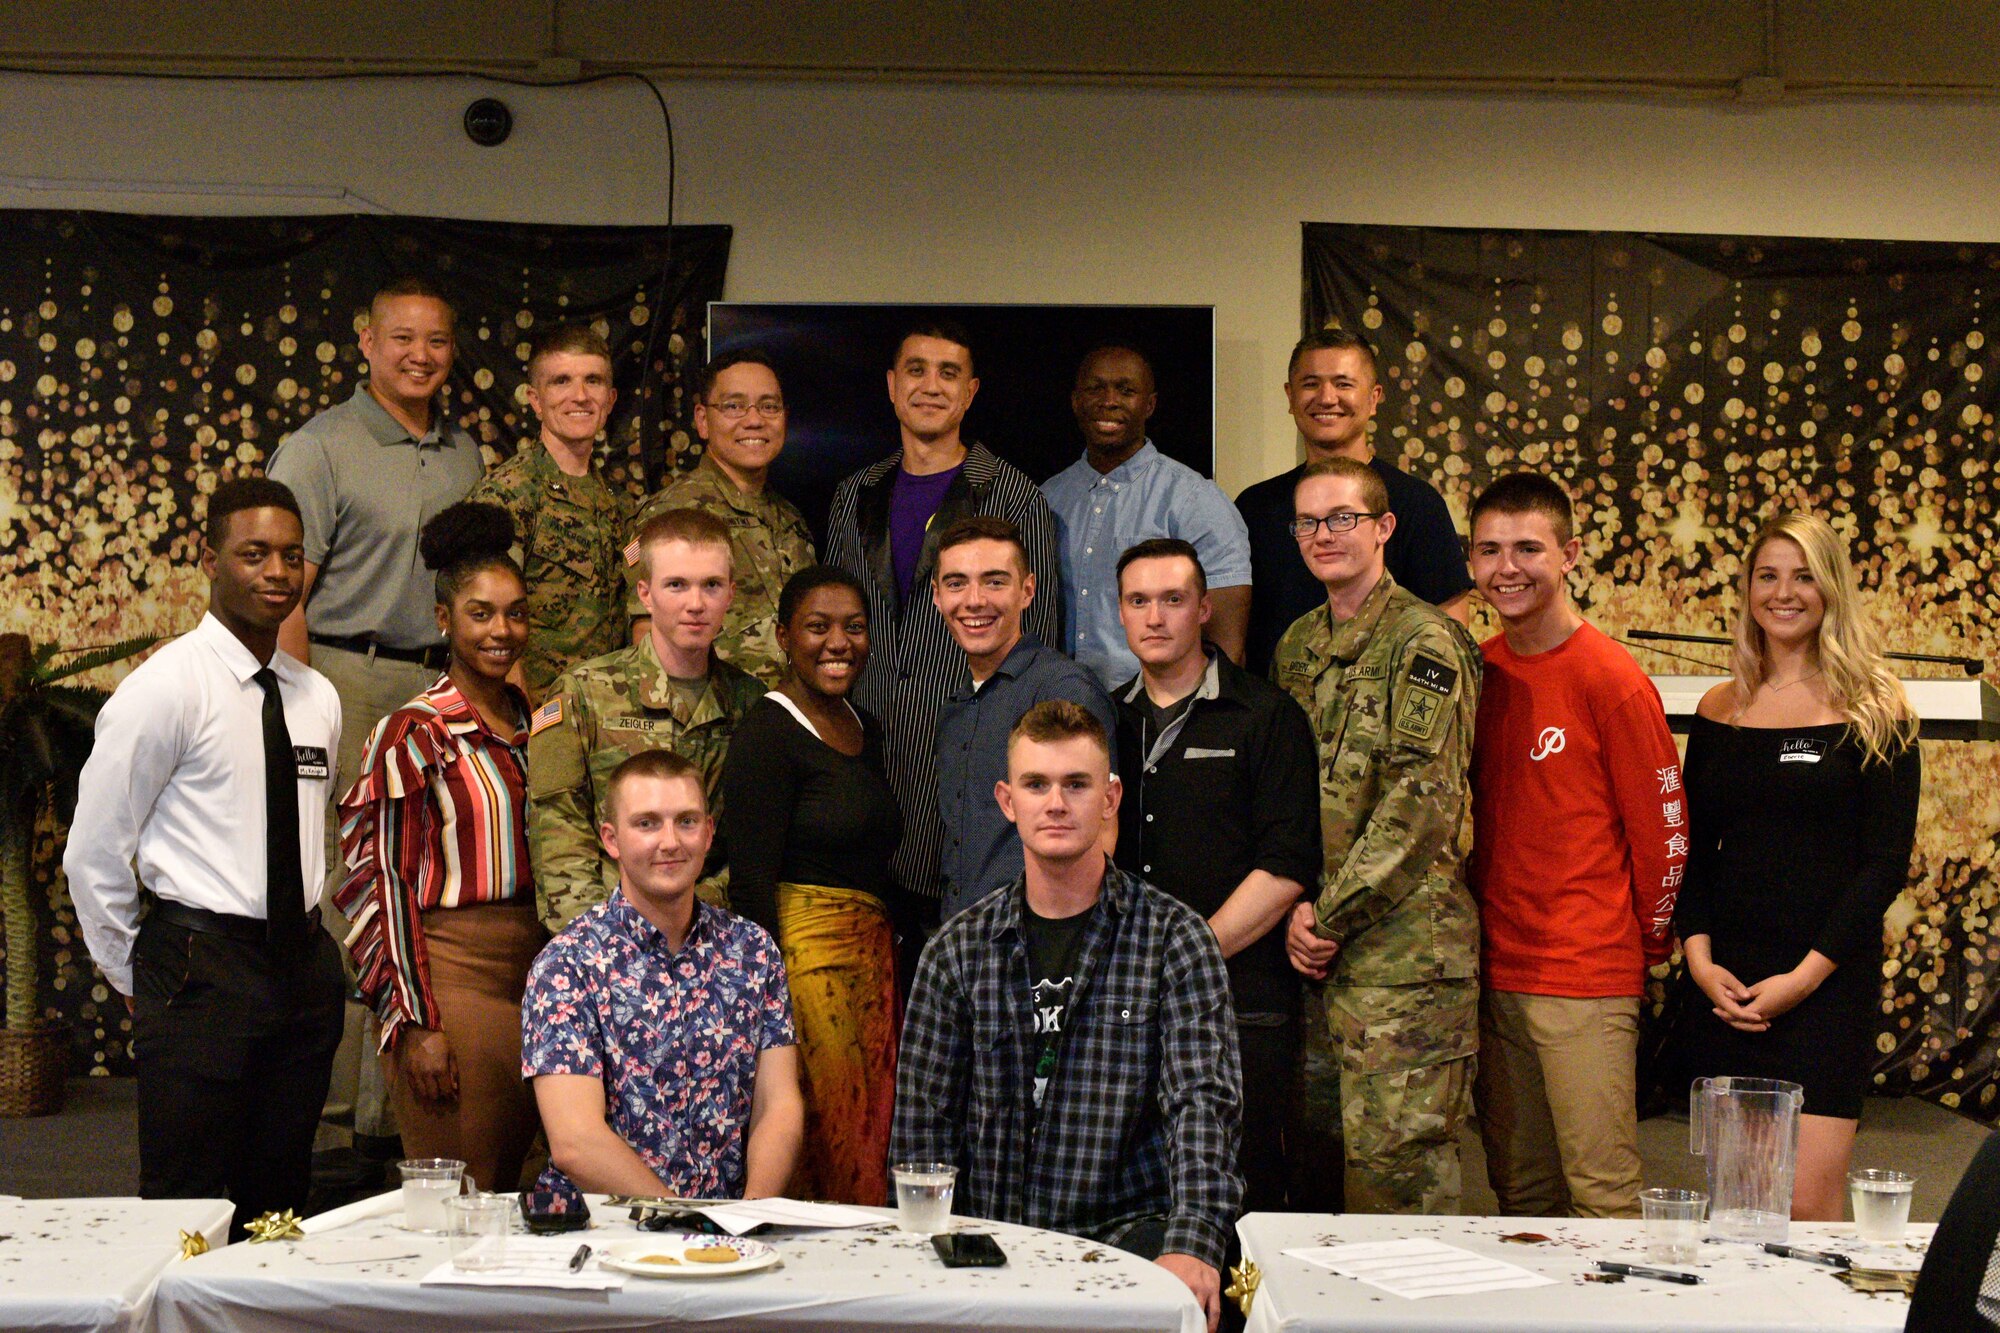 Judges and participants pose after the semi-annual Goodfellow’s Got Talent show at the Crossroads Student Ministry Center on Goodfellow Air Force Base, Texas, July 13, 2018.  The Crossroads Student Ministry Center host Goodfellow’s Got Talent show every year to allow students to express their unique skills. (U.S. Air Force photo by Senior Airman Randall Moose/Released)